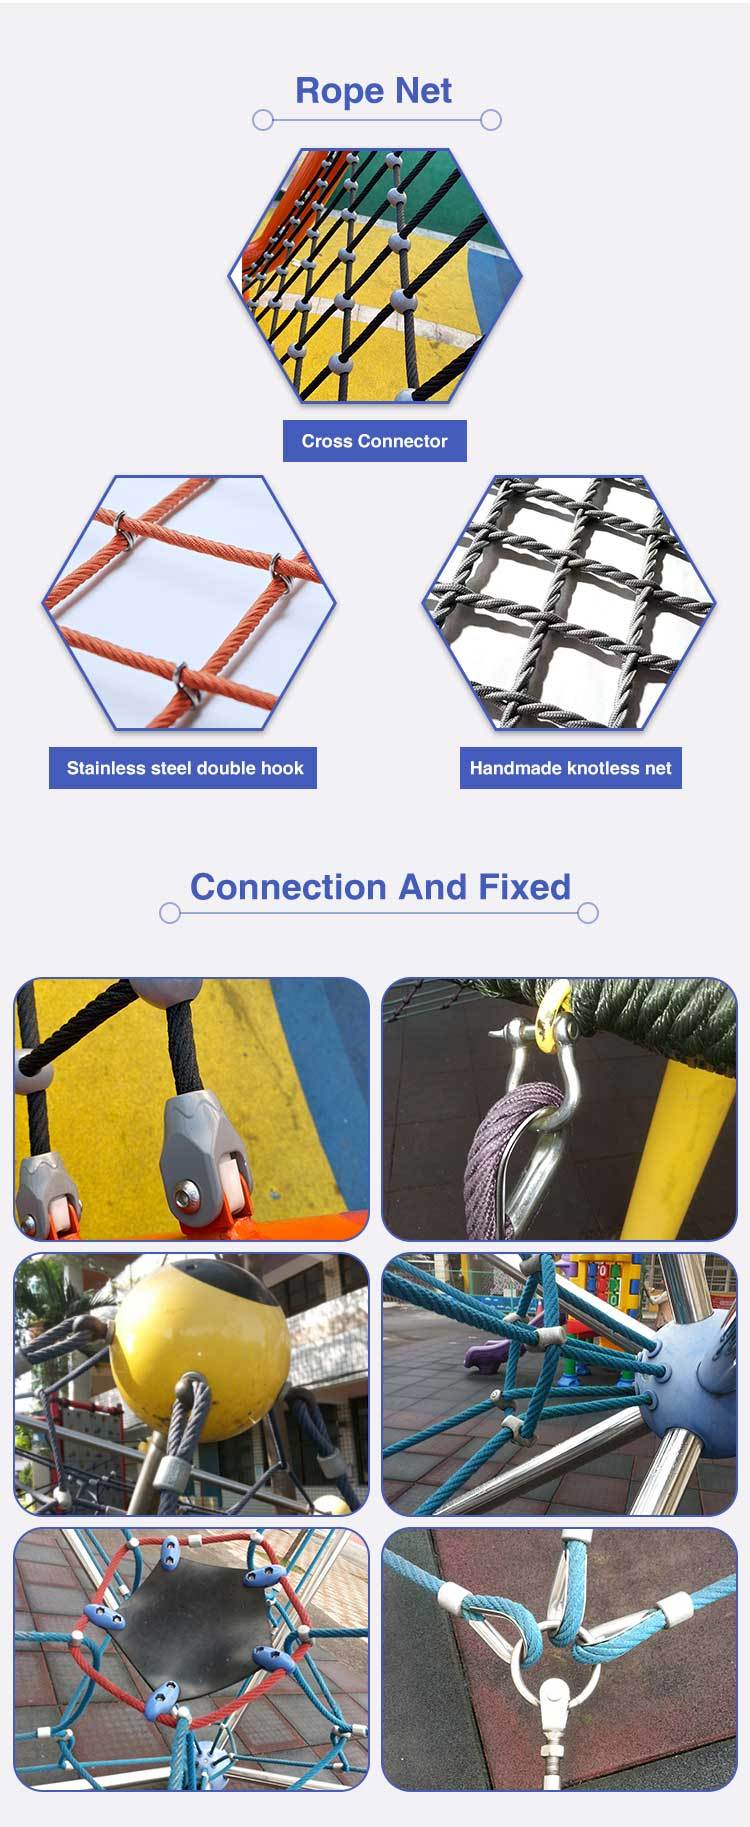 Different types of ropes used in the kids rope net climber playground and different connectors for the ropes